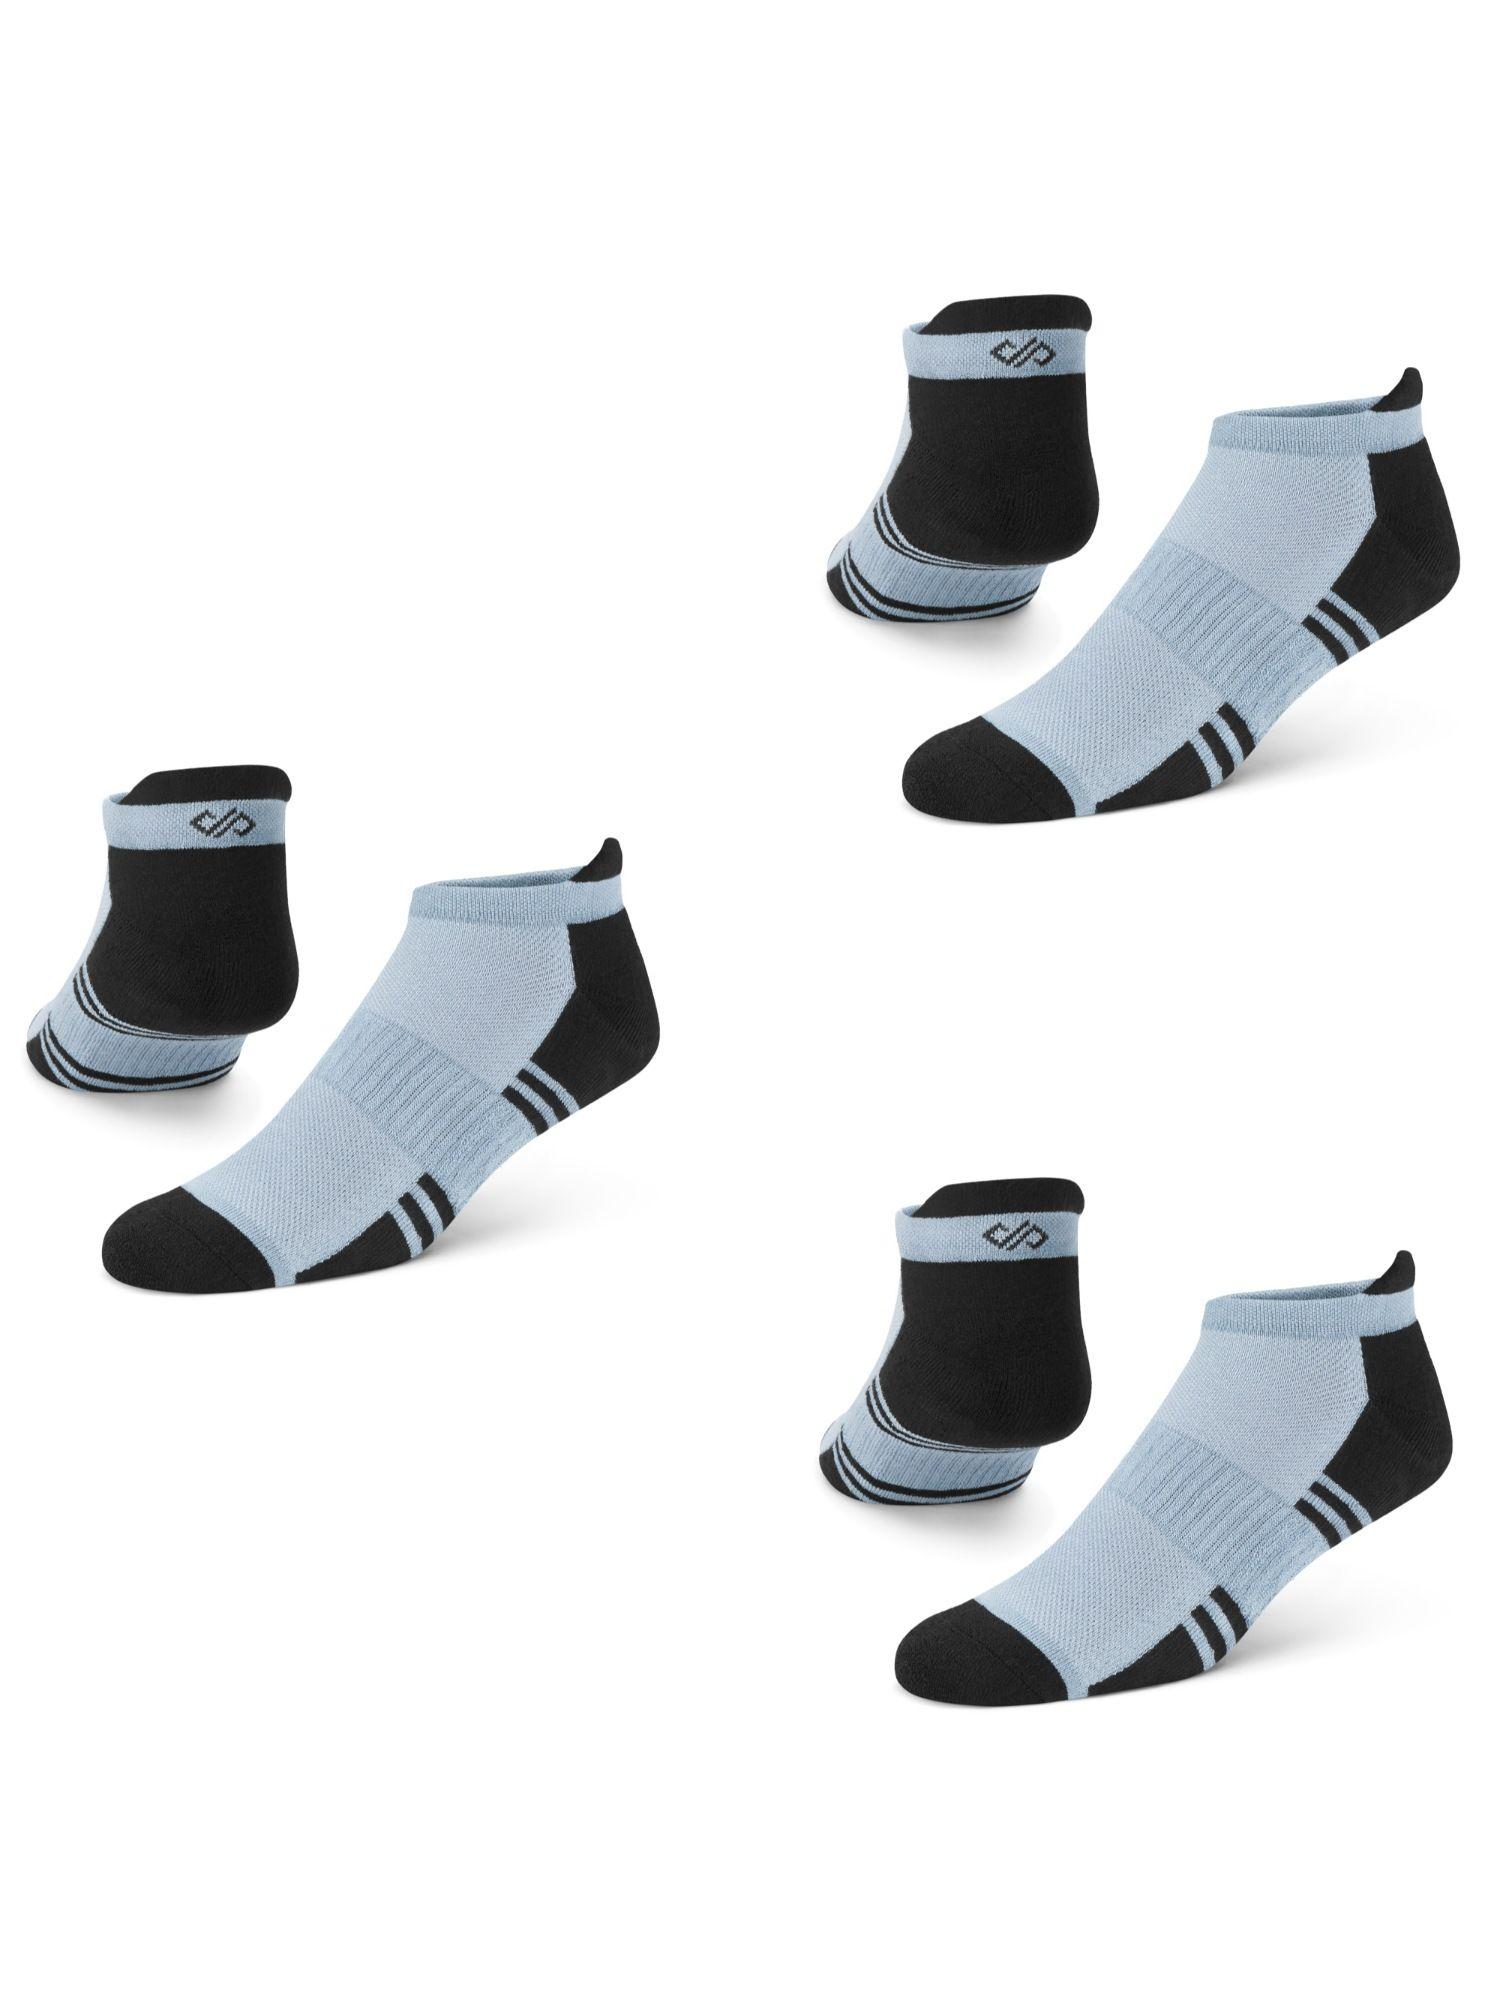 dual solid grey men bamboo ankle length socks - free size - pack of 3 pairs